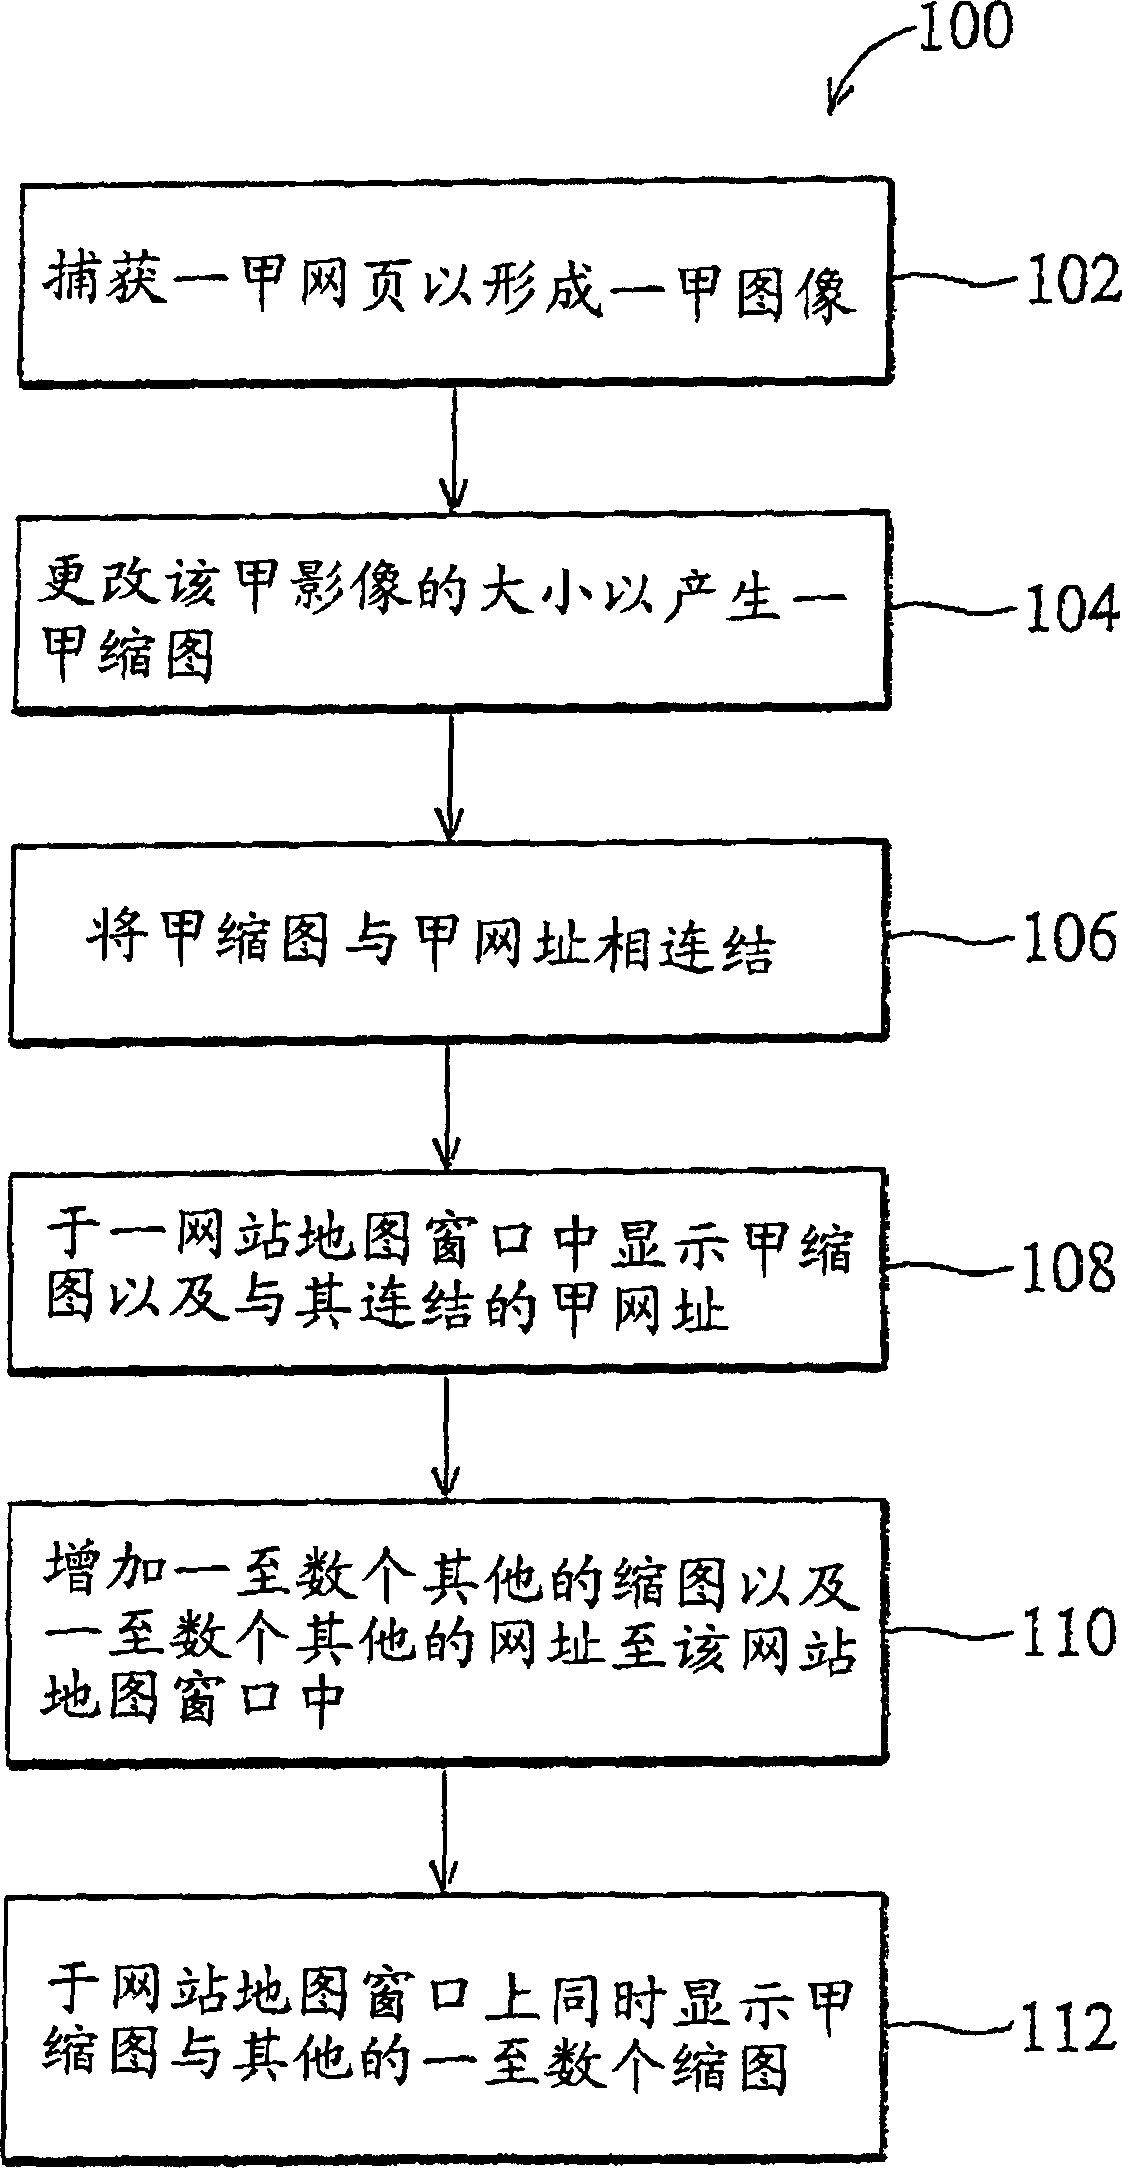 Method for providing a sitemap viewer of web browser applications